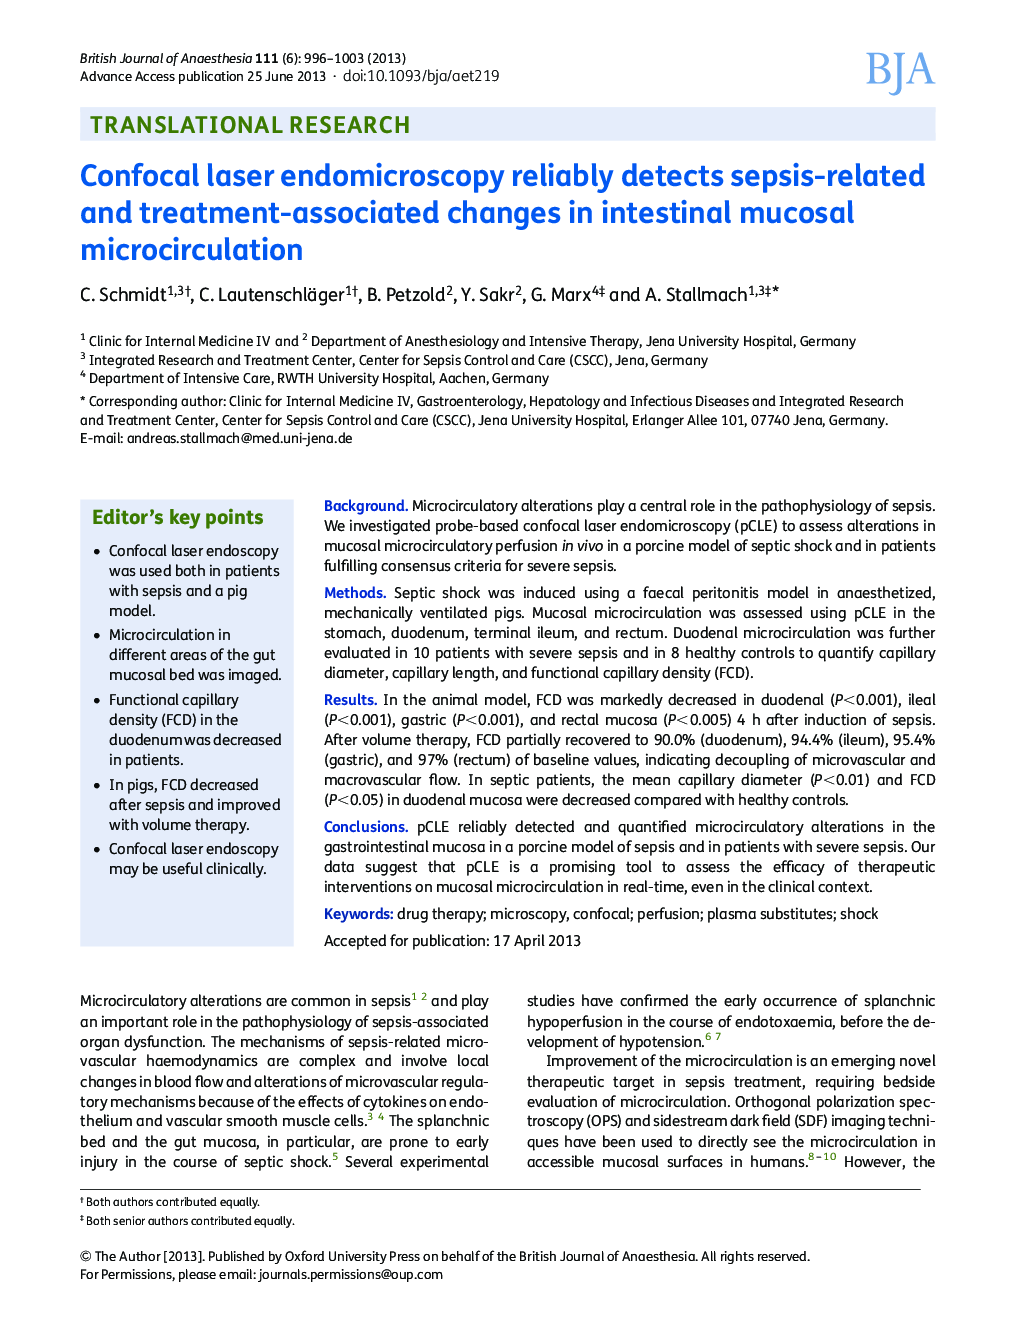 Confocal laser endomicroscopy reliably detects sepsis-related and treatment-associated changes in intestinal mucosal microcirculation